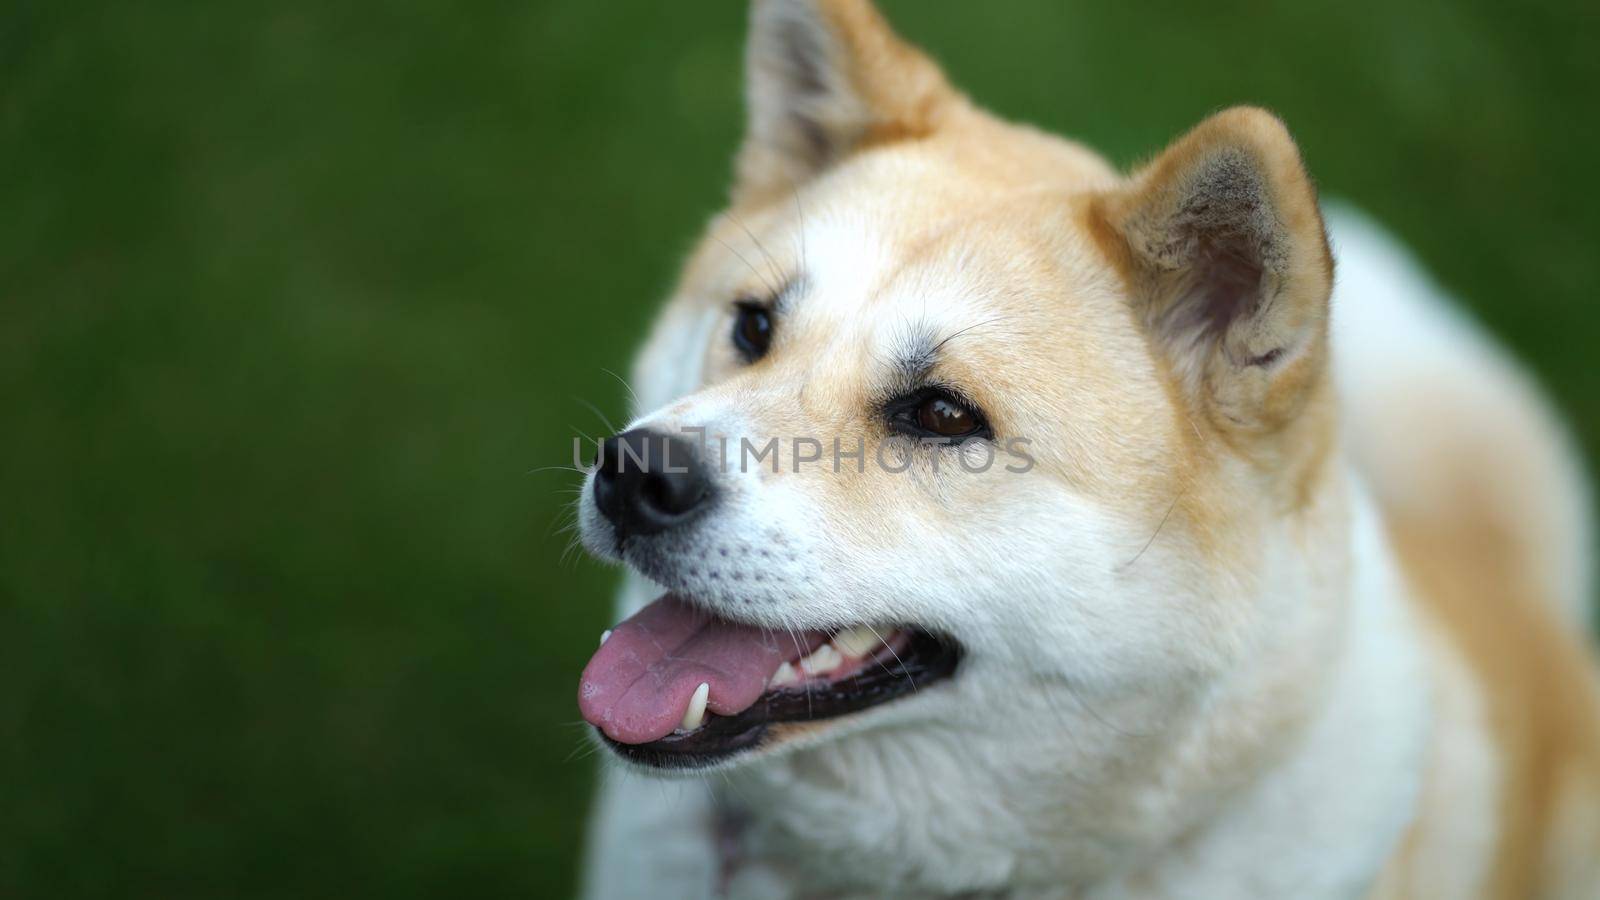 Muzzle of an Akita Inu dog close-up on a background of a green lawn. The dog sticks out its tongue and breathes through an open mouth